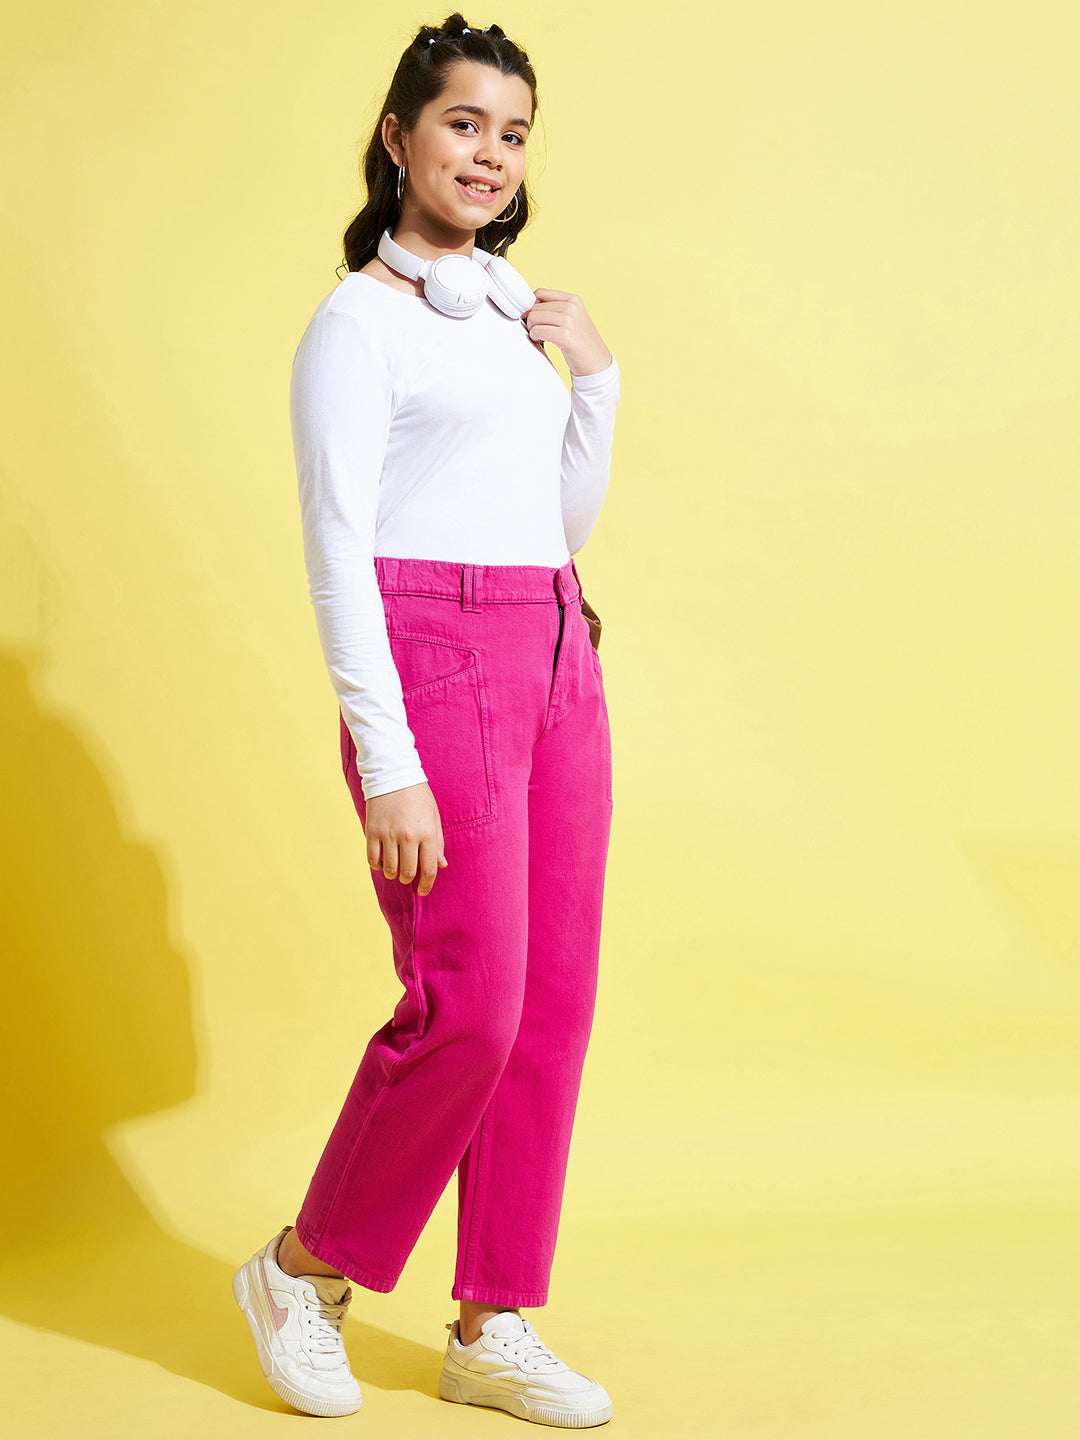 Cotton Front Pocket Girls Jeans Pant at Rs 400/piece in Surat